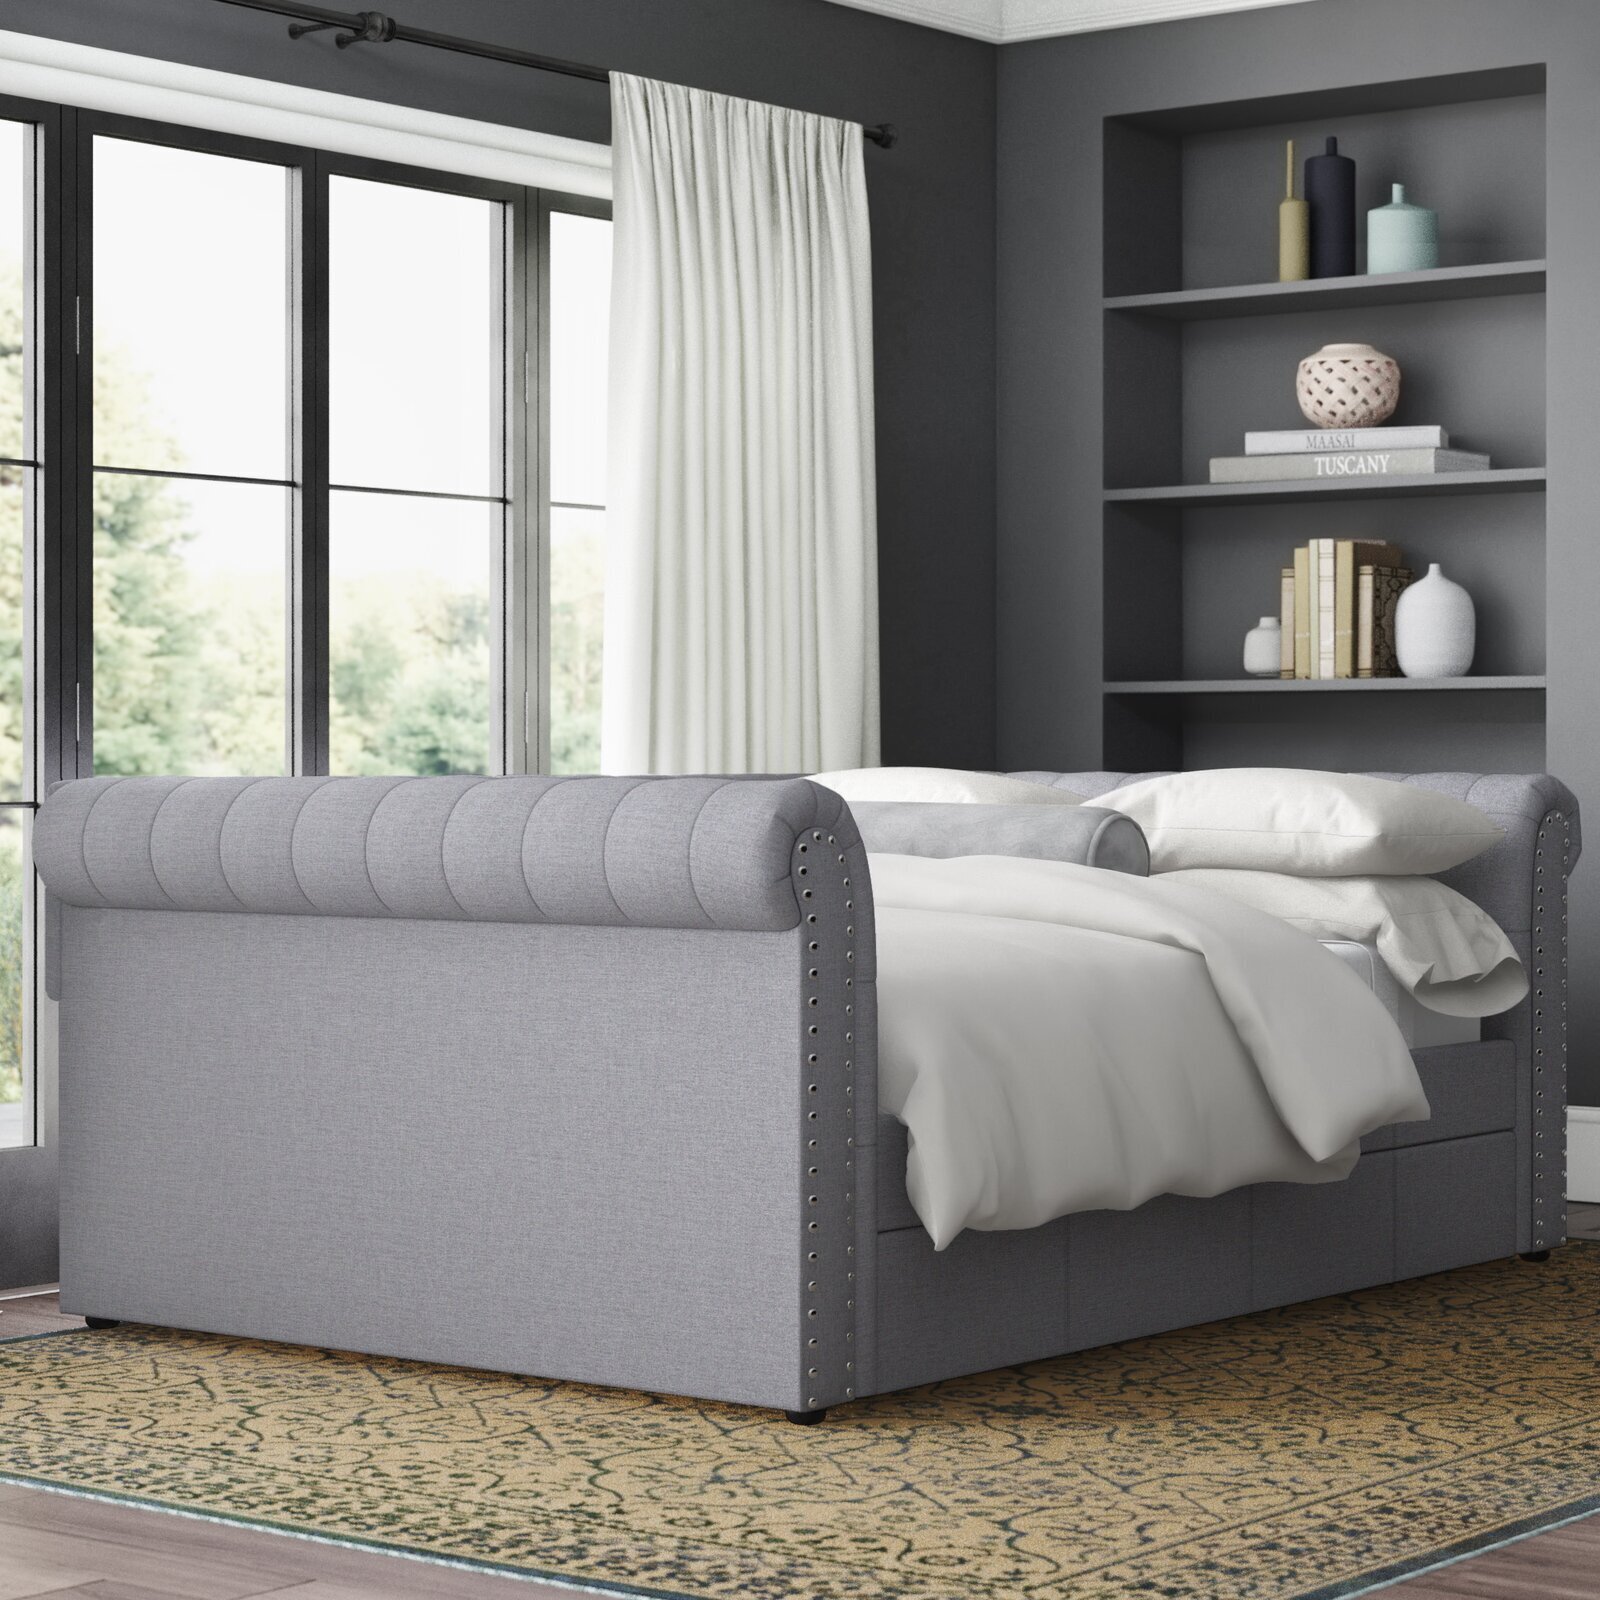 Daybed Converts to Queen